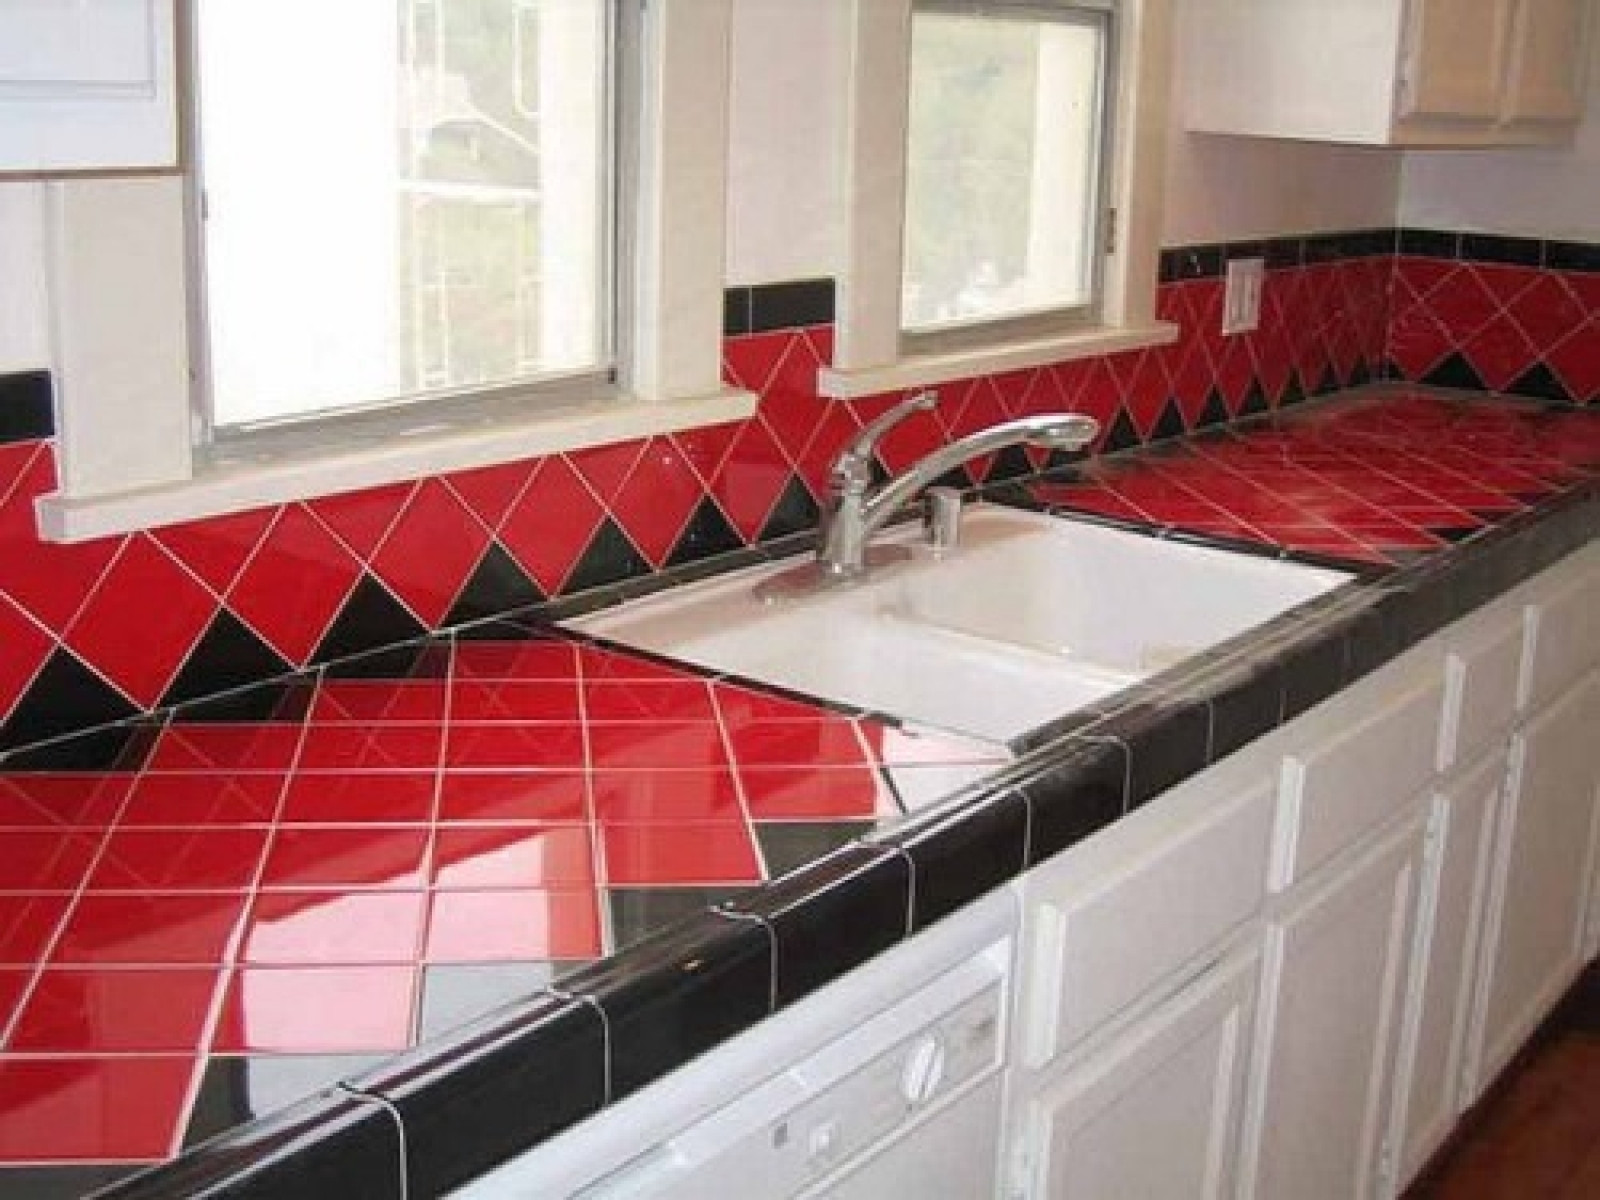 Kitchen Counter Tile
 Tile Countertops Cost Installed Plus Pros and Cons of